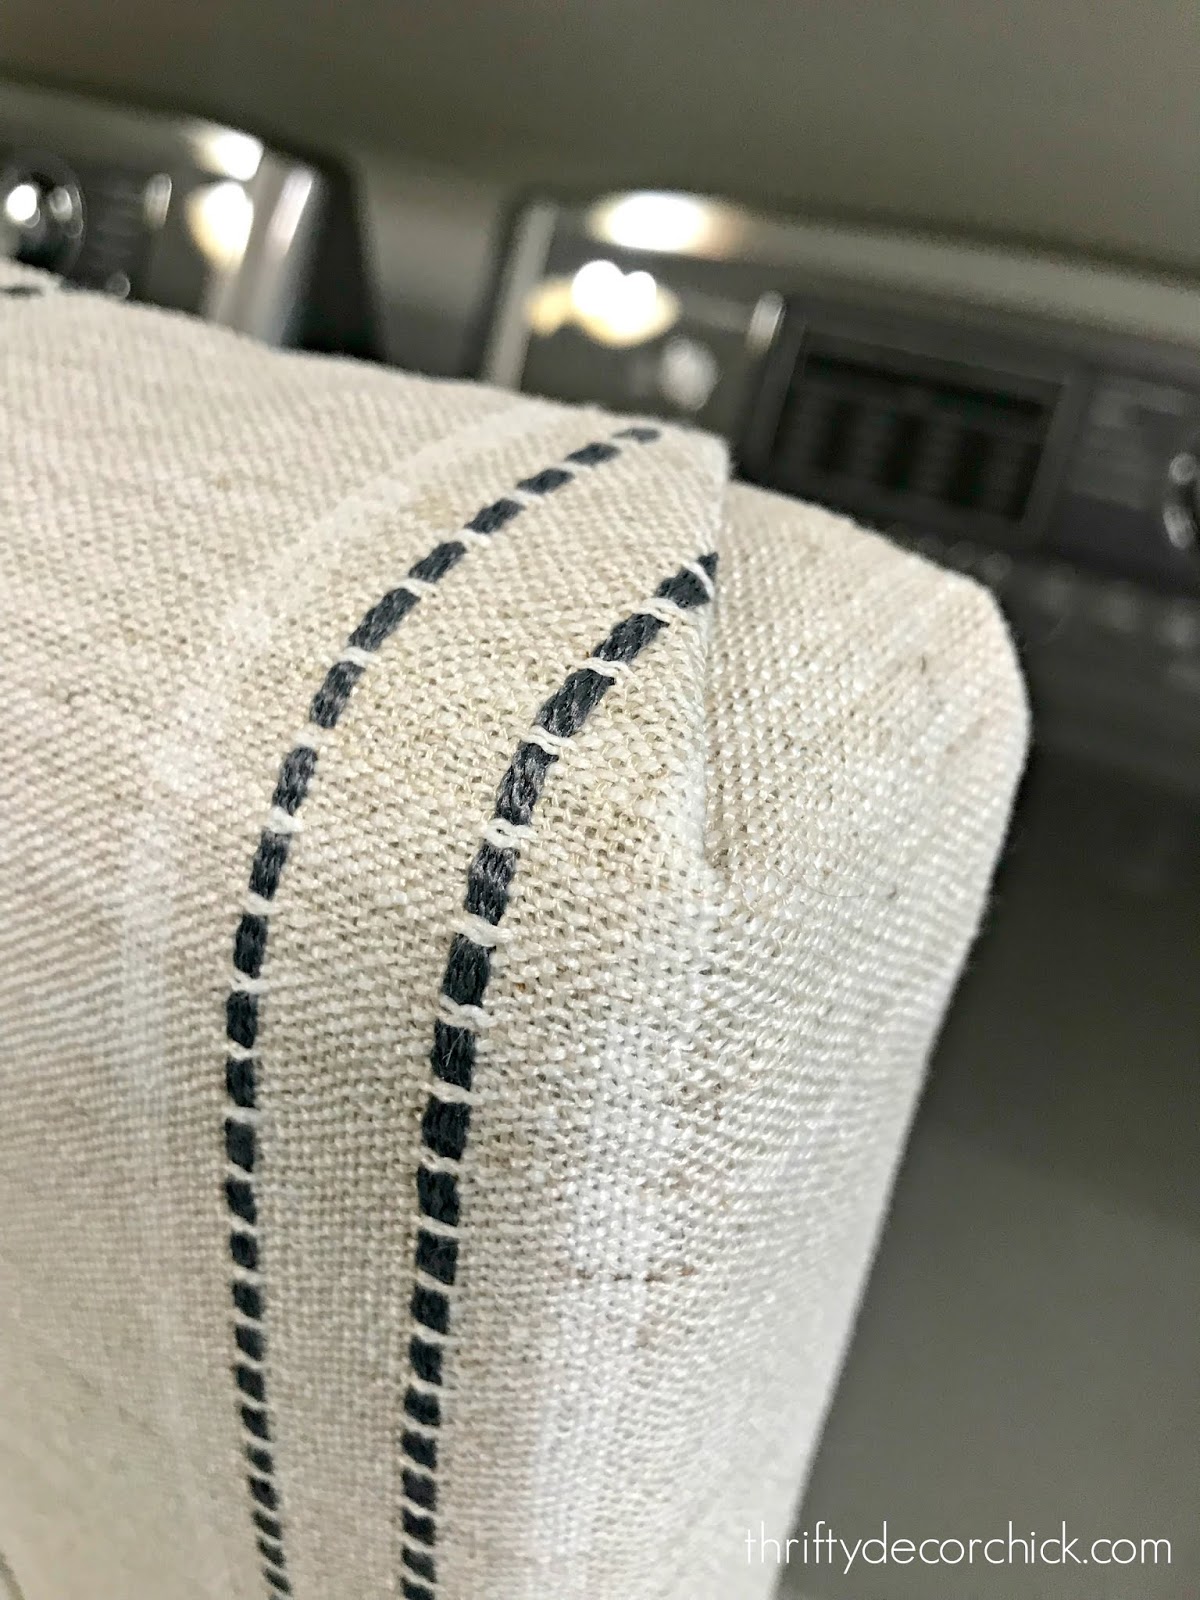 Wrapping corners on bench cushion